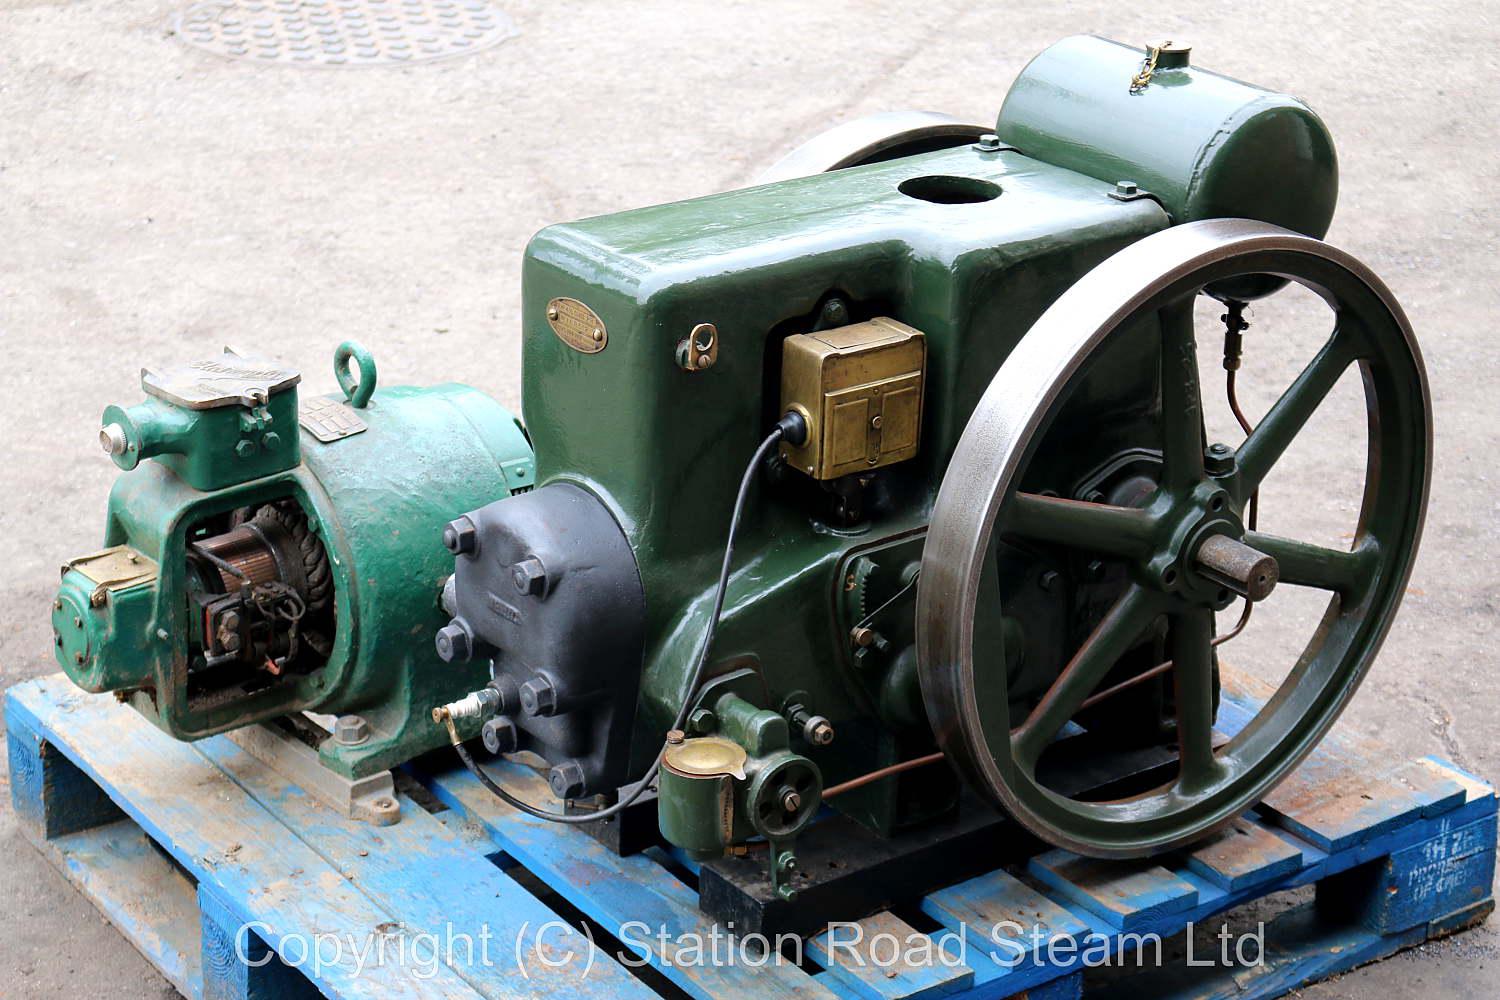 Ruston & Hornsby 9PB 4 1/2hp engine with Electromotor motor